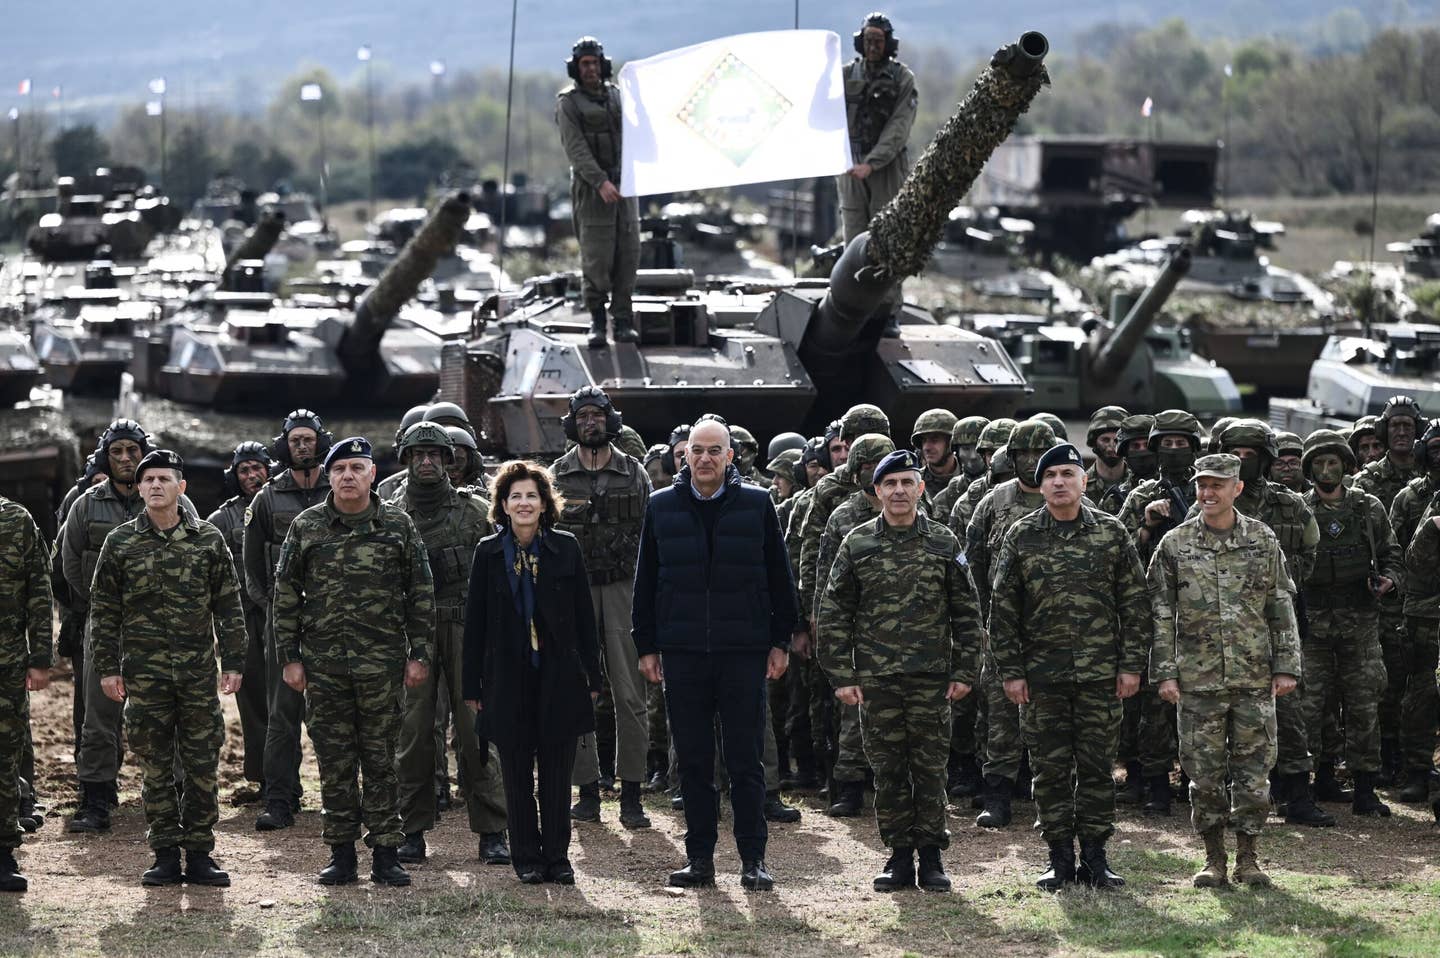 Greek Minister of Defense Nikos Dendias (center, right) and French Ambassador to Greece Laurence Auer (center, left) pose with soldiers during the Olympic Cooperation 23 exercise at the Petrochori training area, near Xanthi, northern Greece, on November 24, 2023. <em>Photo by SAKIS MITROLIDIS/AFP via Getty Images</em>